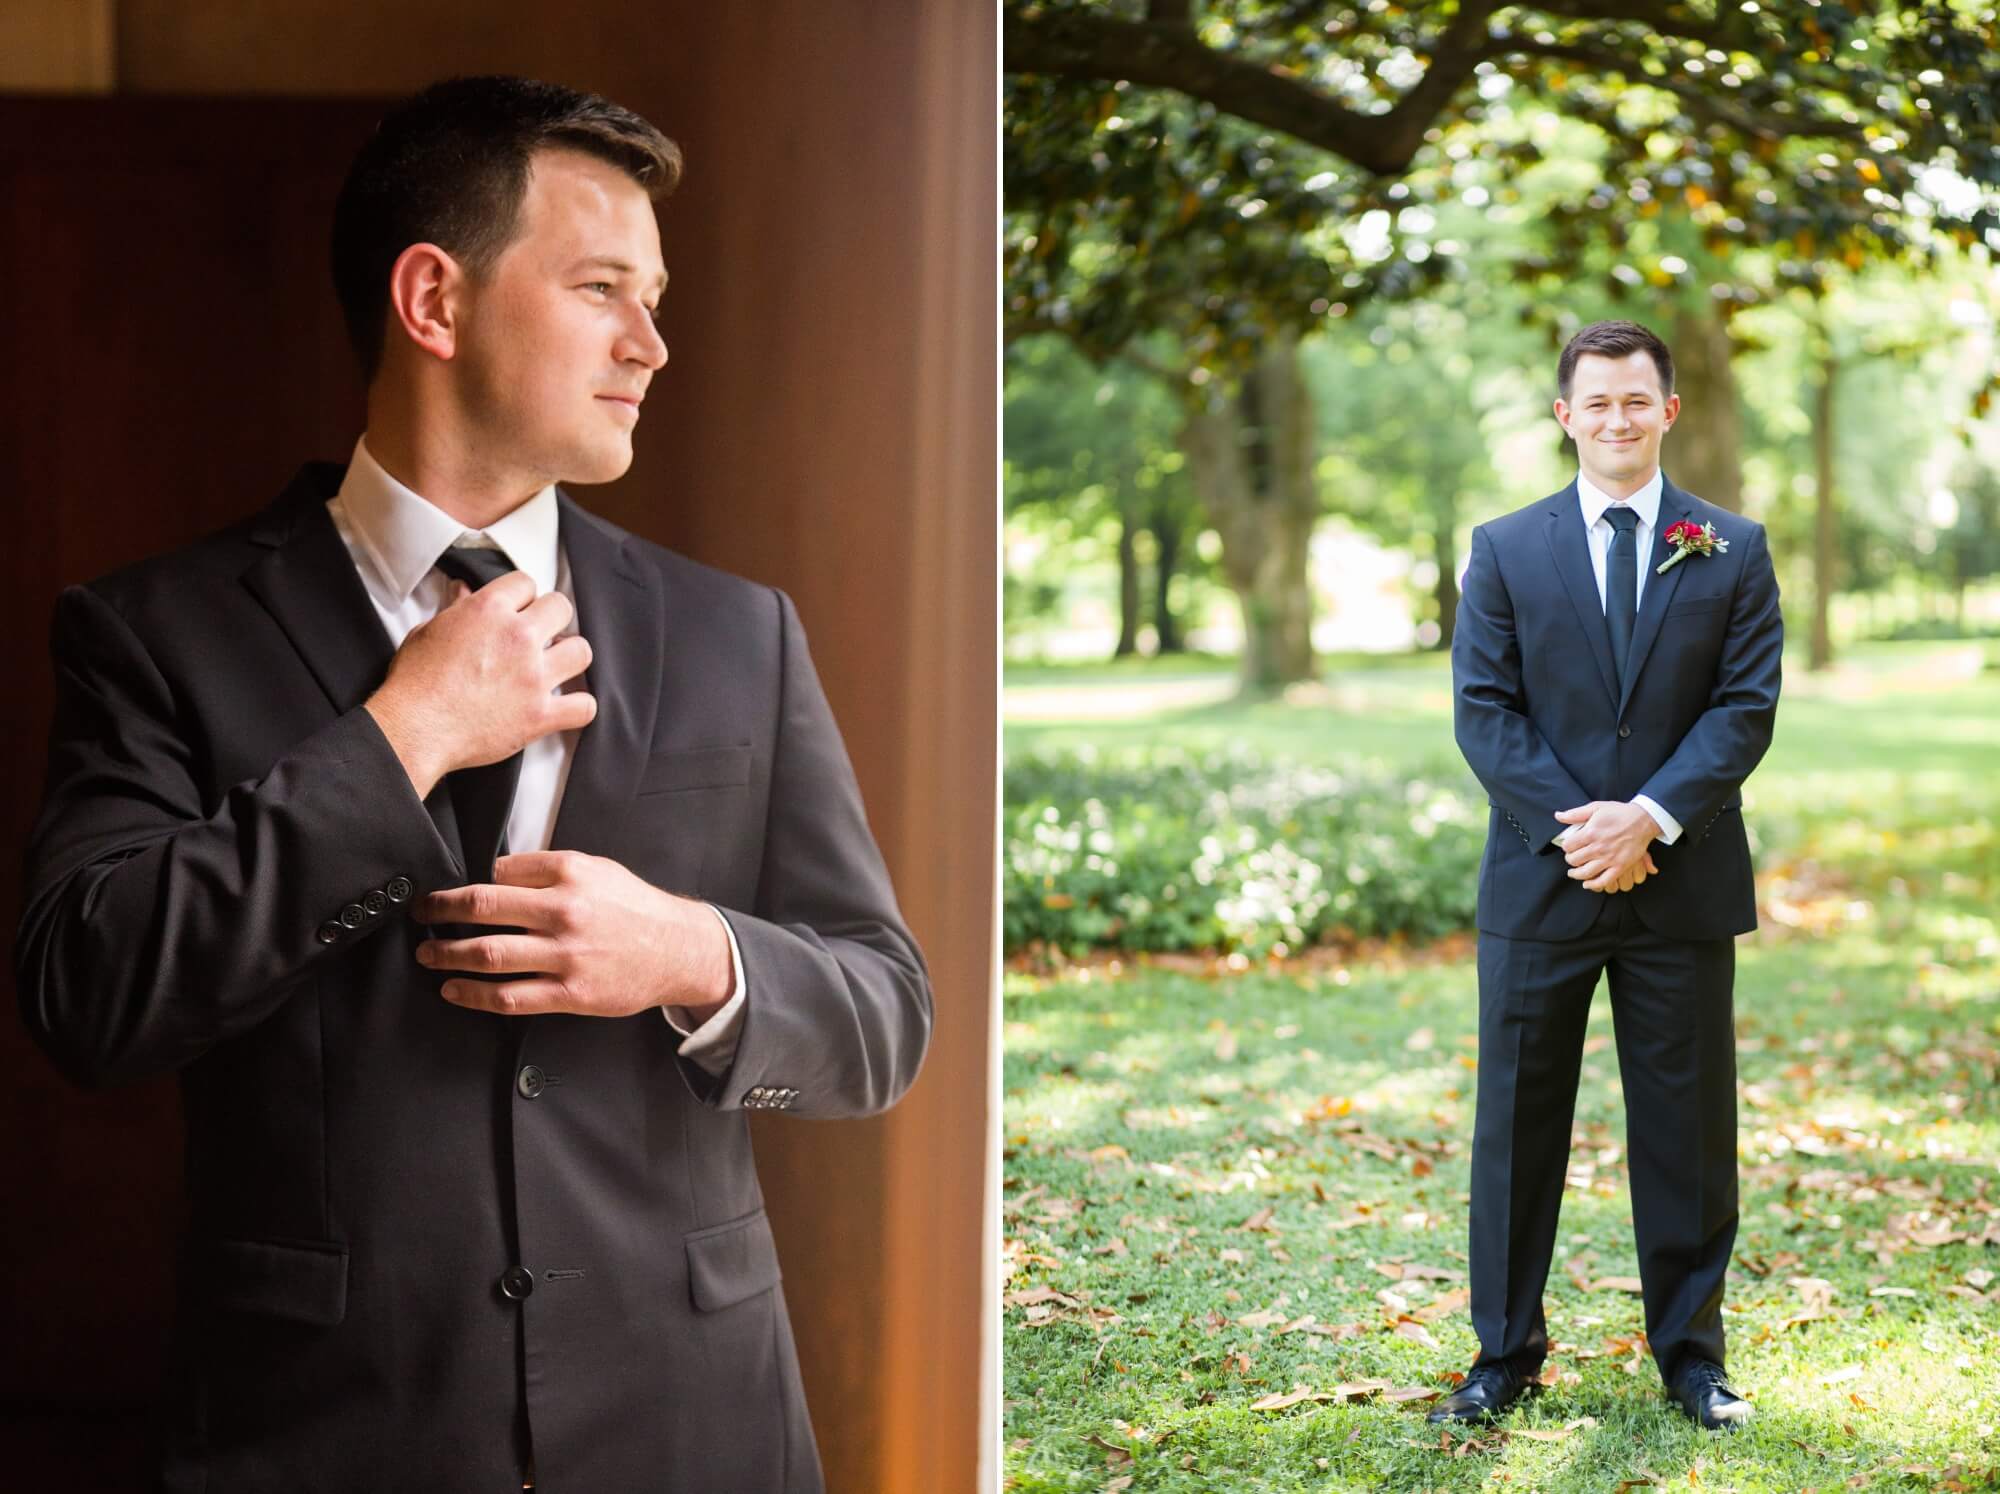 Groom before wedding ceremony at Riverwood Mansion in Nashville, Tennessee. Photography by Krista Lee.